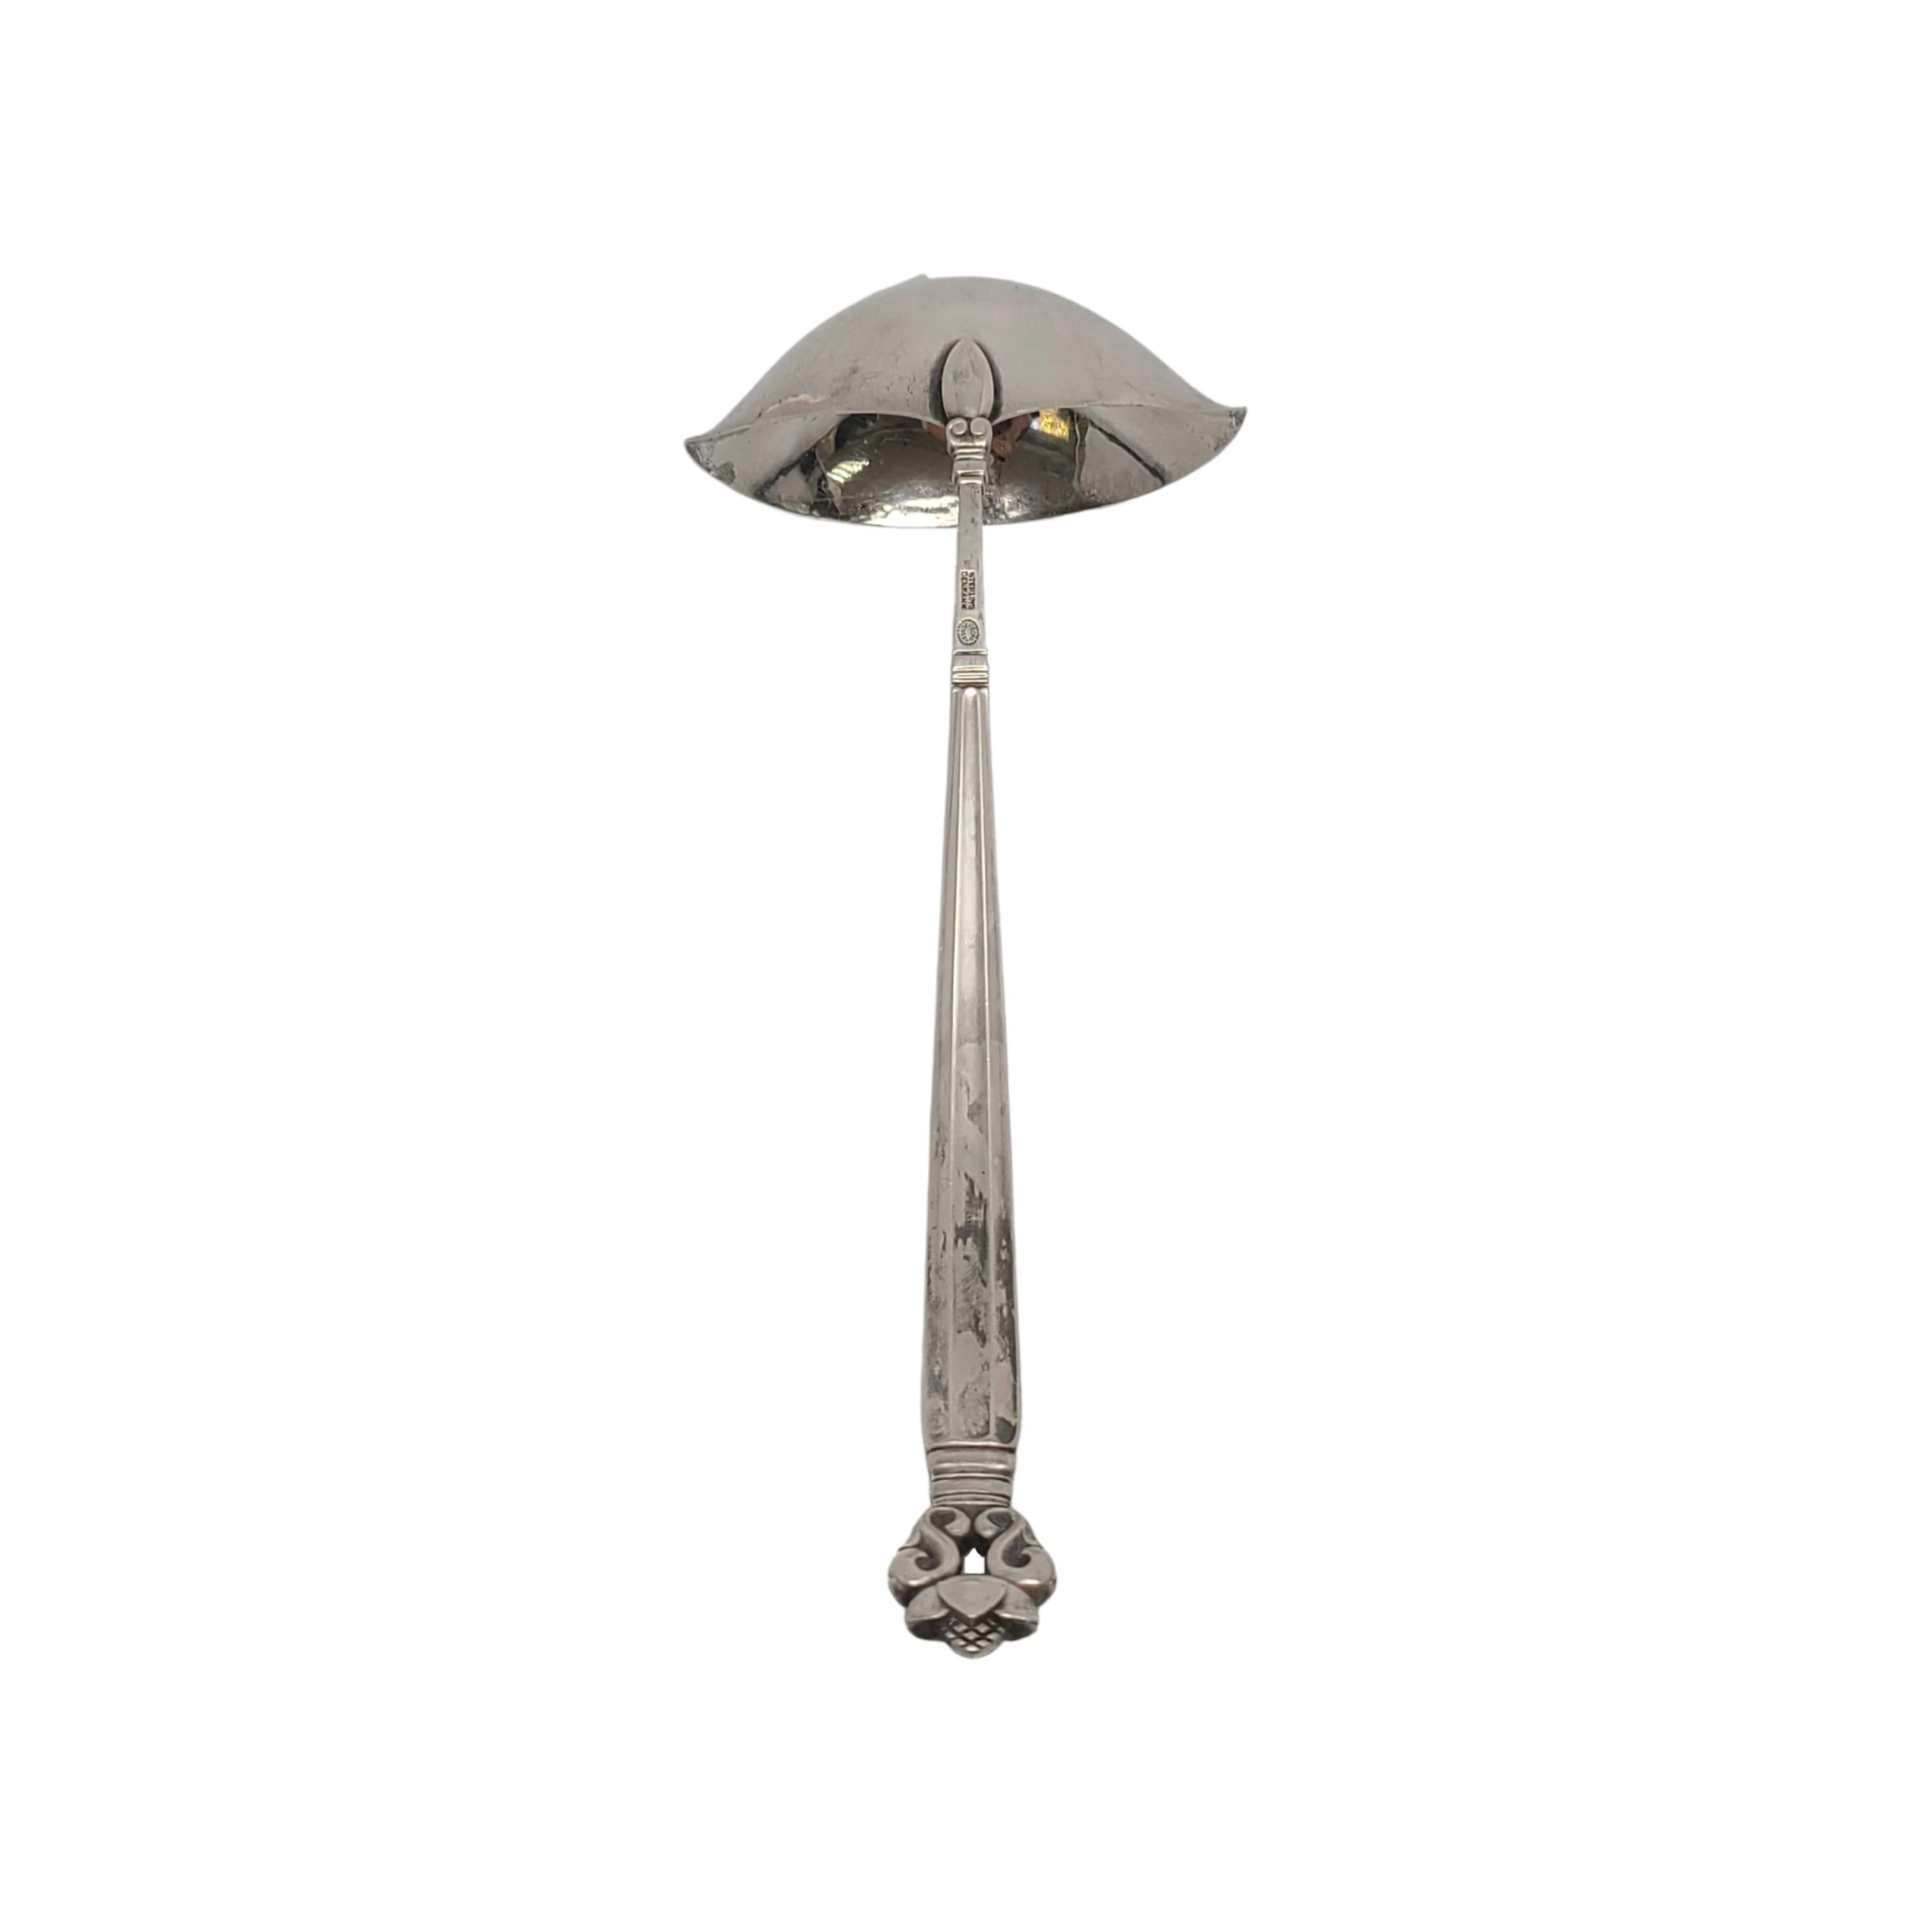 Vintage Georg Jensen Denmark sterling silver gravy ladle in the Acorn pattern.

No monogram

The Acorn pattern was introduced in 1915 as a collaboration between Georg Jensen and designer Johan Ronde. The Acorn pattern, which combines Art Nouveau and